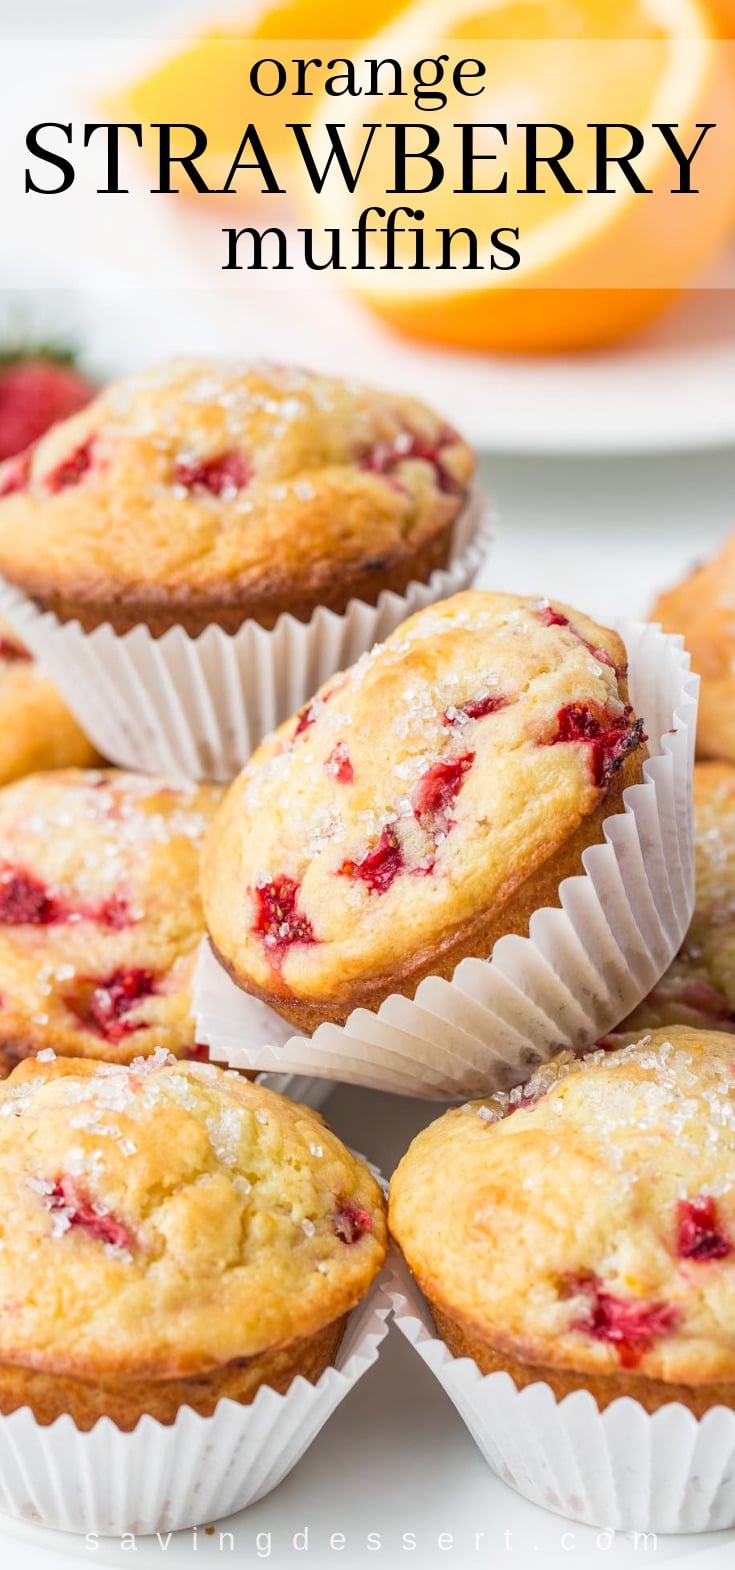 A stack of orange strawberry muffins topped with coarse sugar